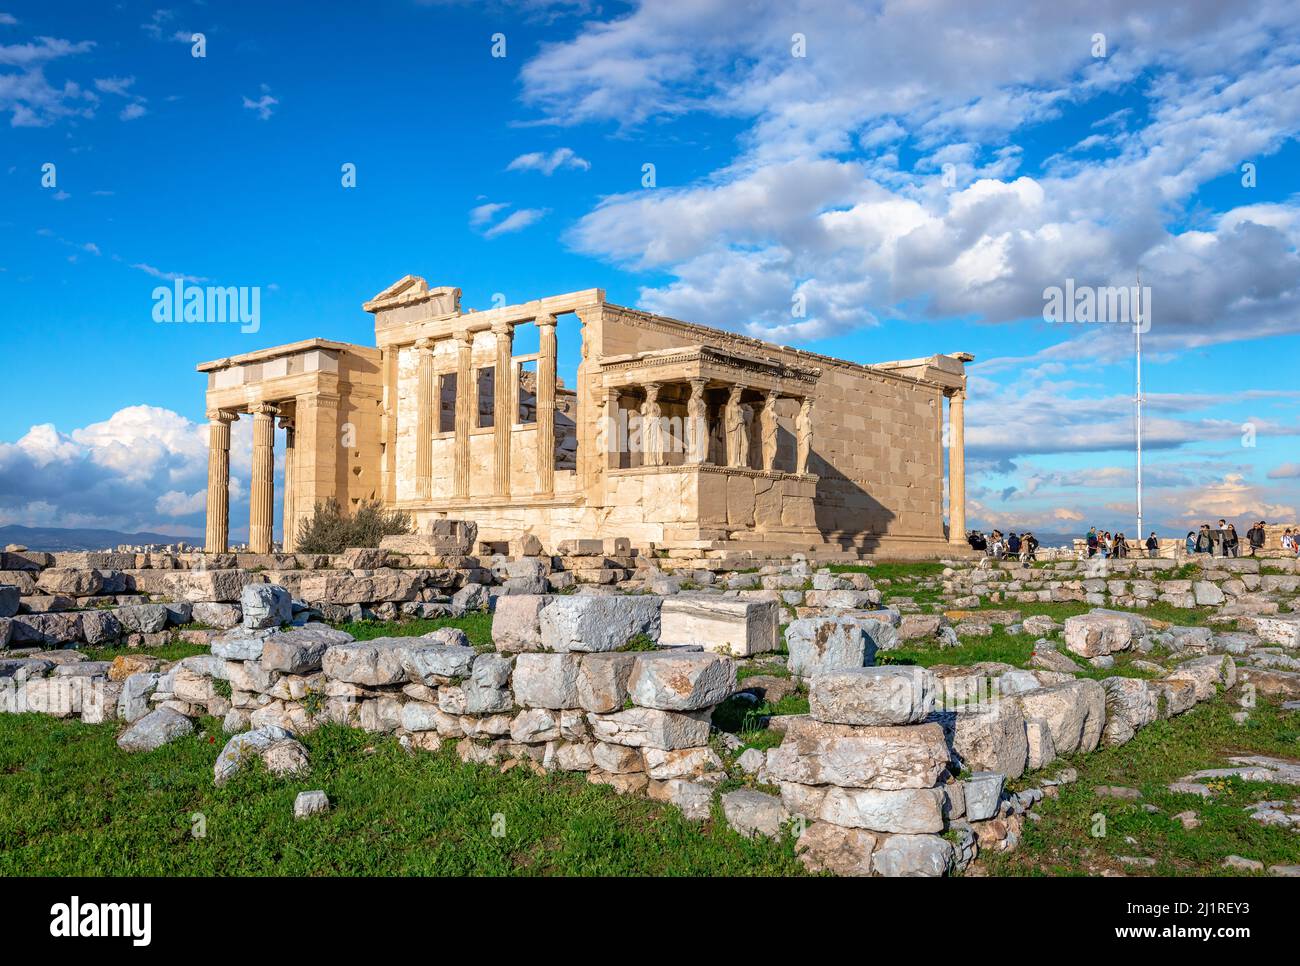 The Erechtheion, an ancient Greek temple on the north side of the Acropolis, dedicated to Goddess Athena and God Poseidon. Athens, Greece. Stock Photo